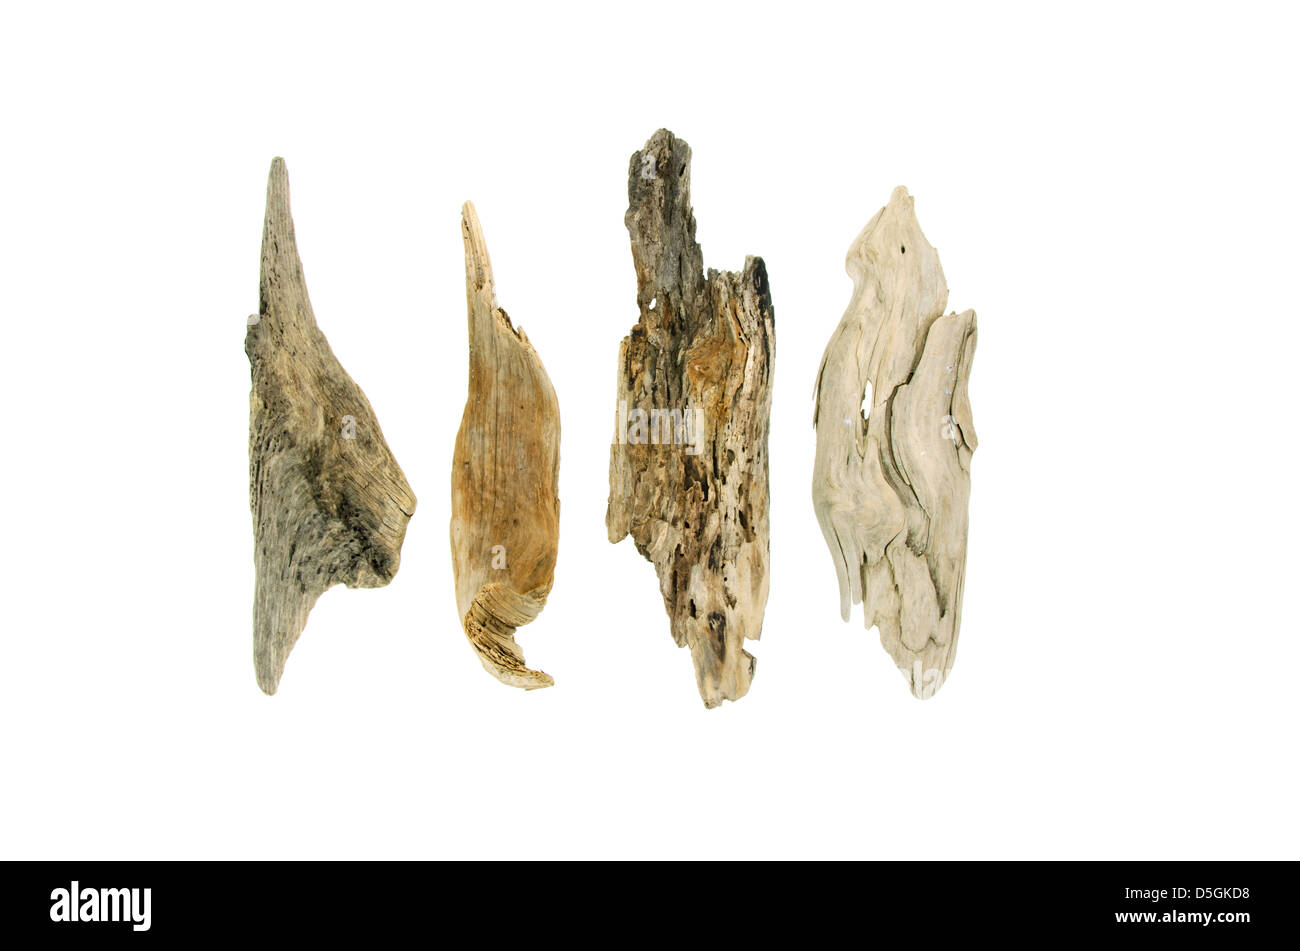 Four pieces of driftwood on a white background. Stock Photo